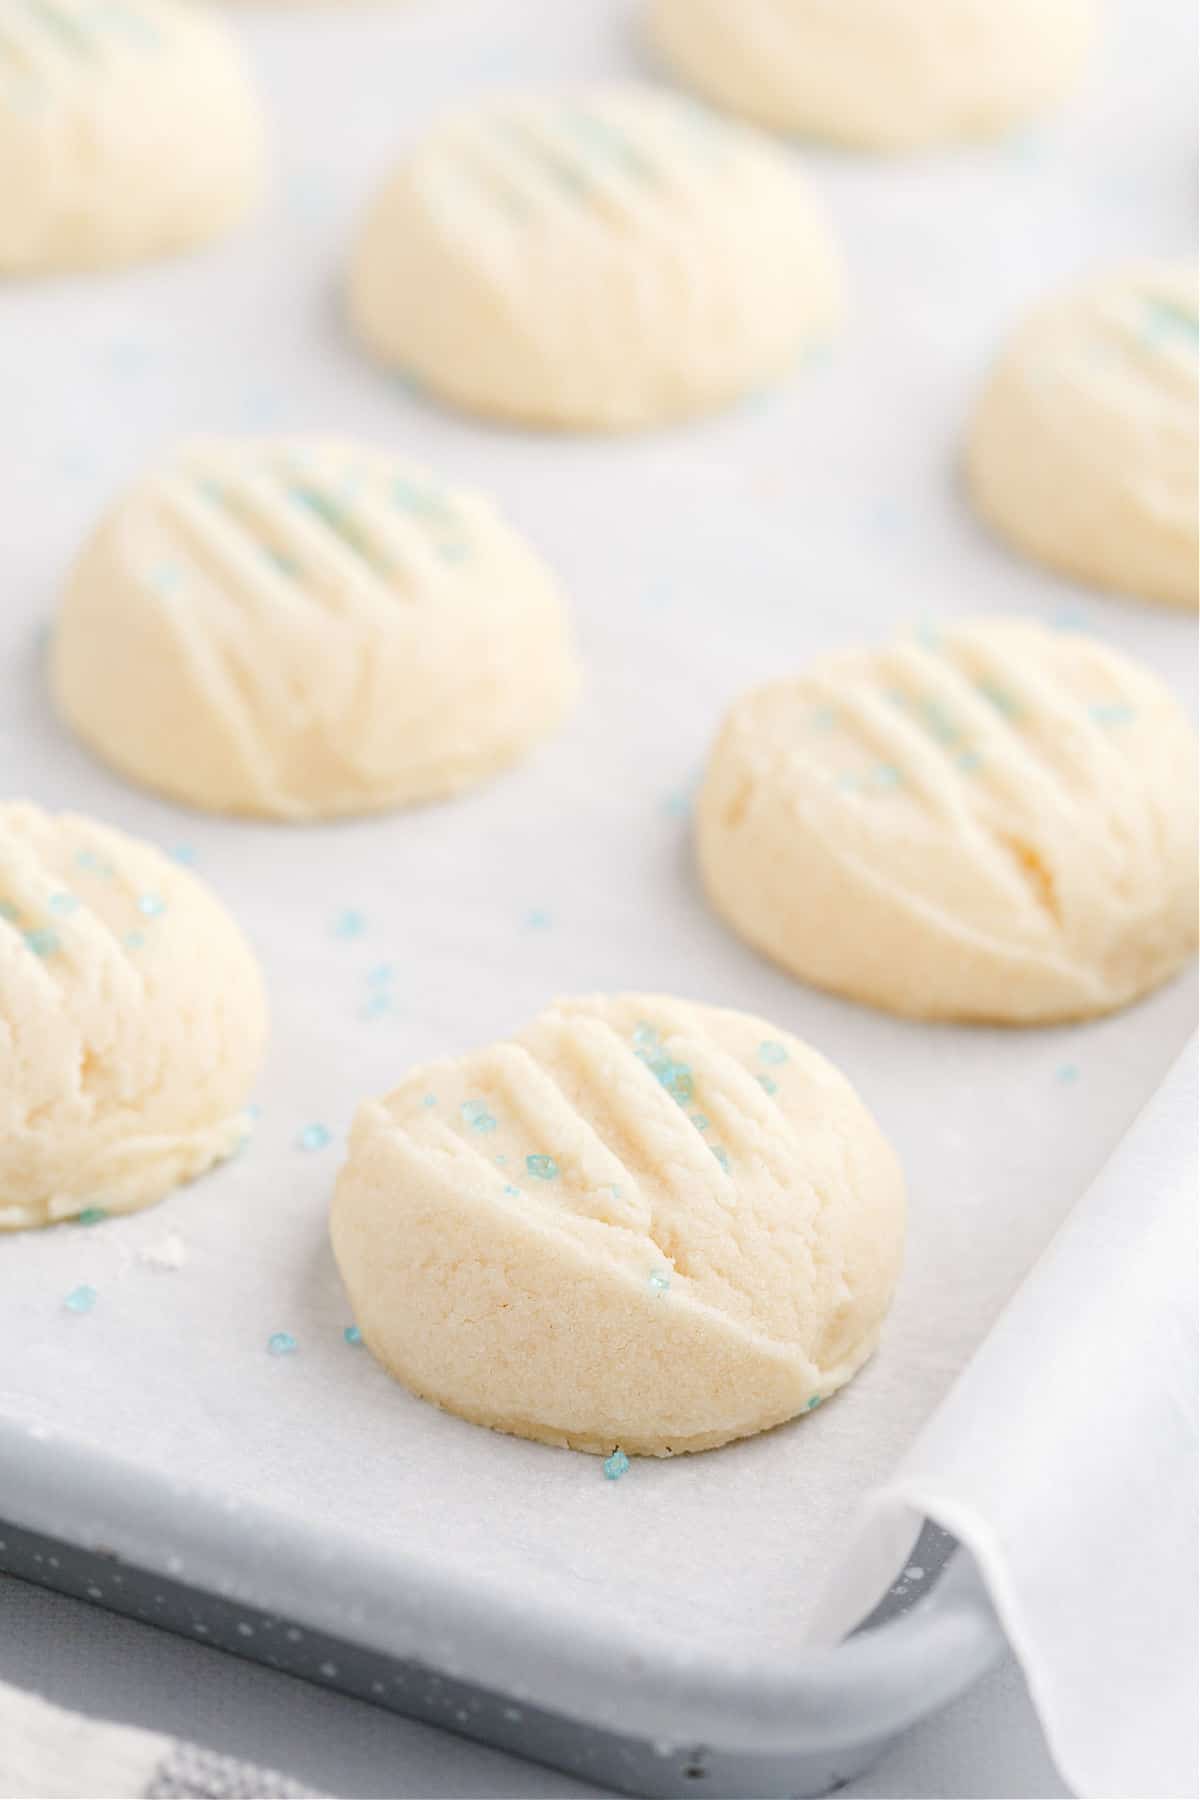 Shortbread cookies baked on a parchment paper lined cookie sheet.